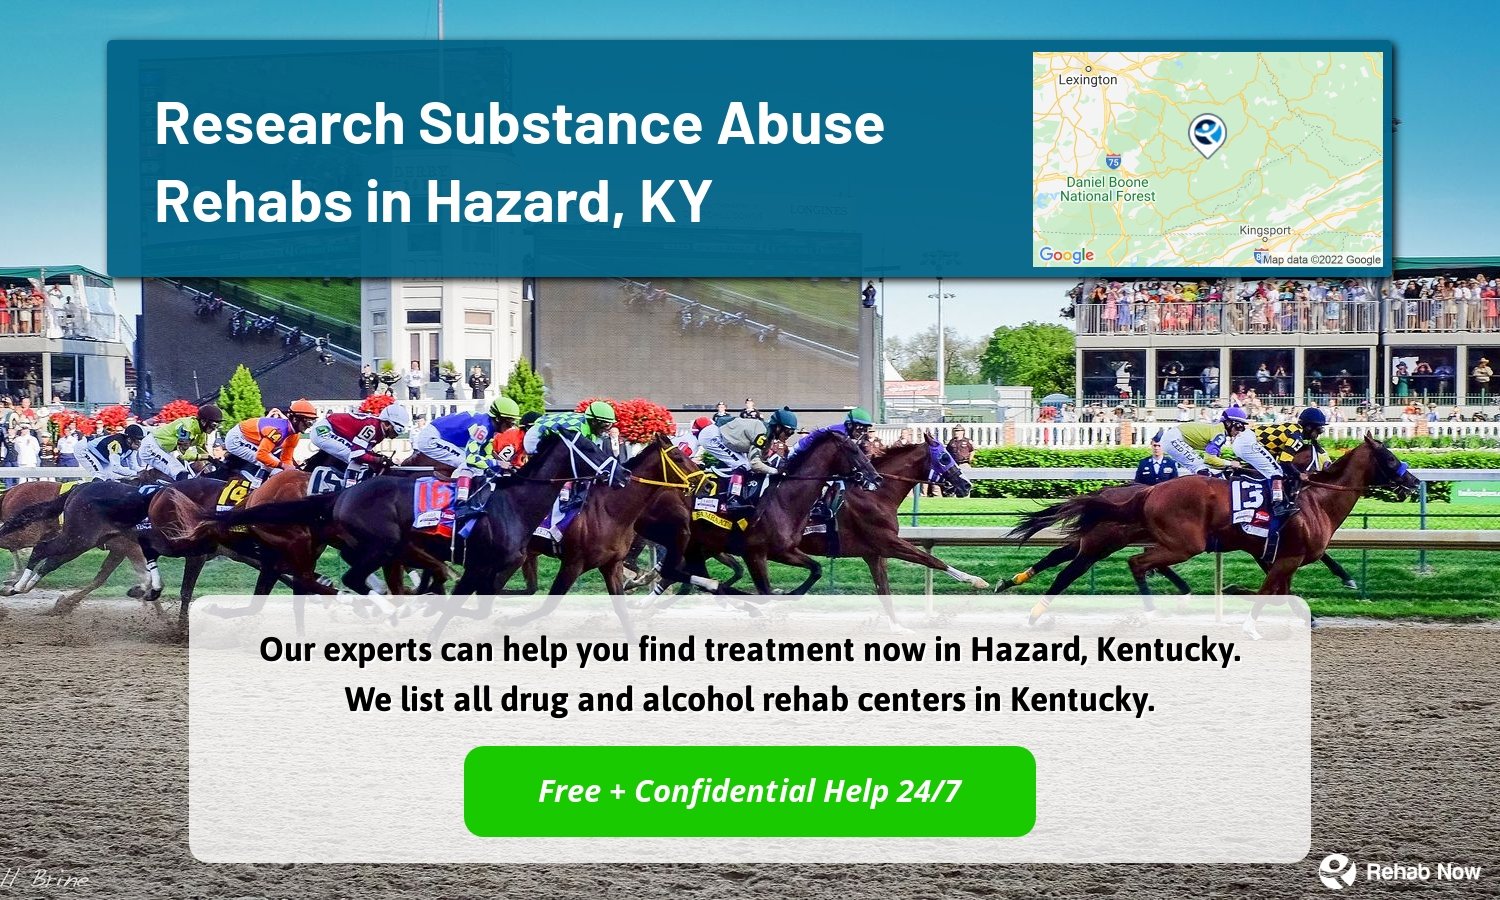 Our experts can help you find treatment now in Hazard, Kentucky. We list all drug and alcohol rehab centers in Kentucky.